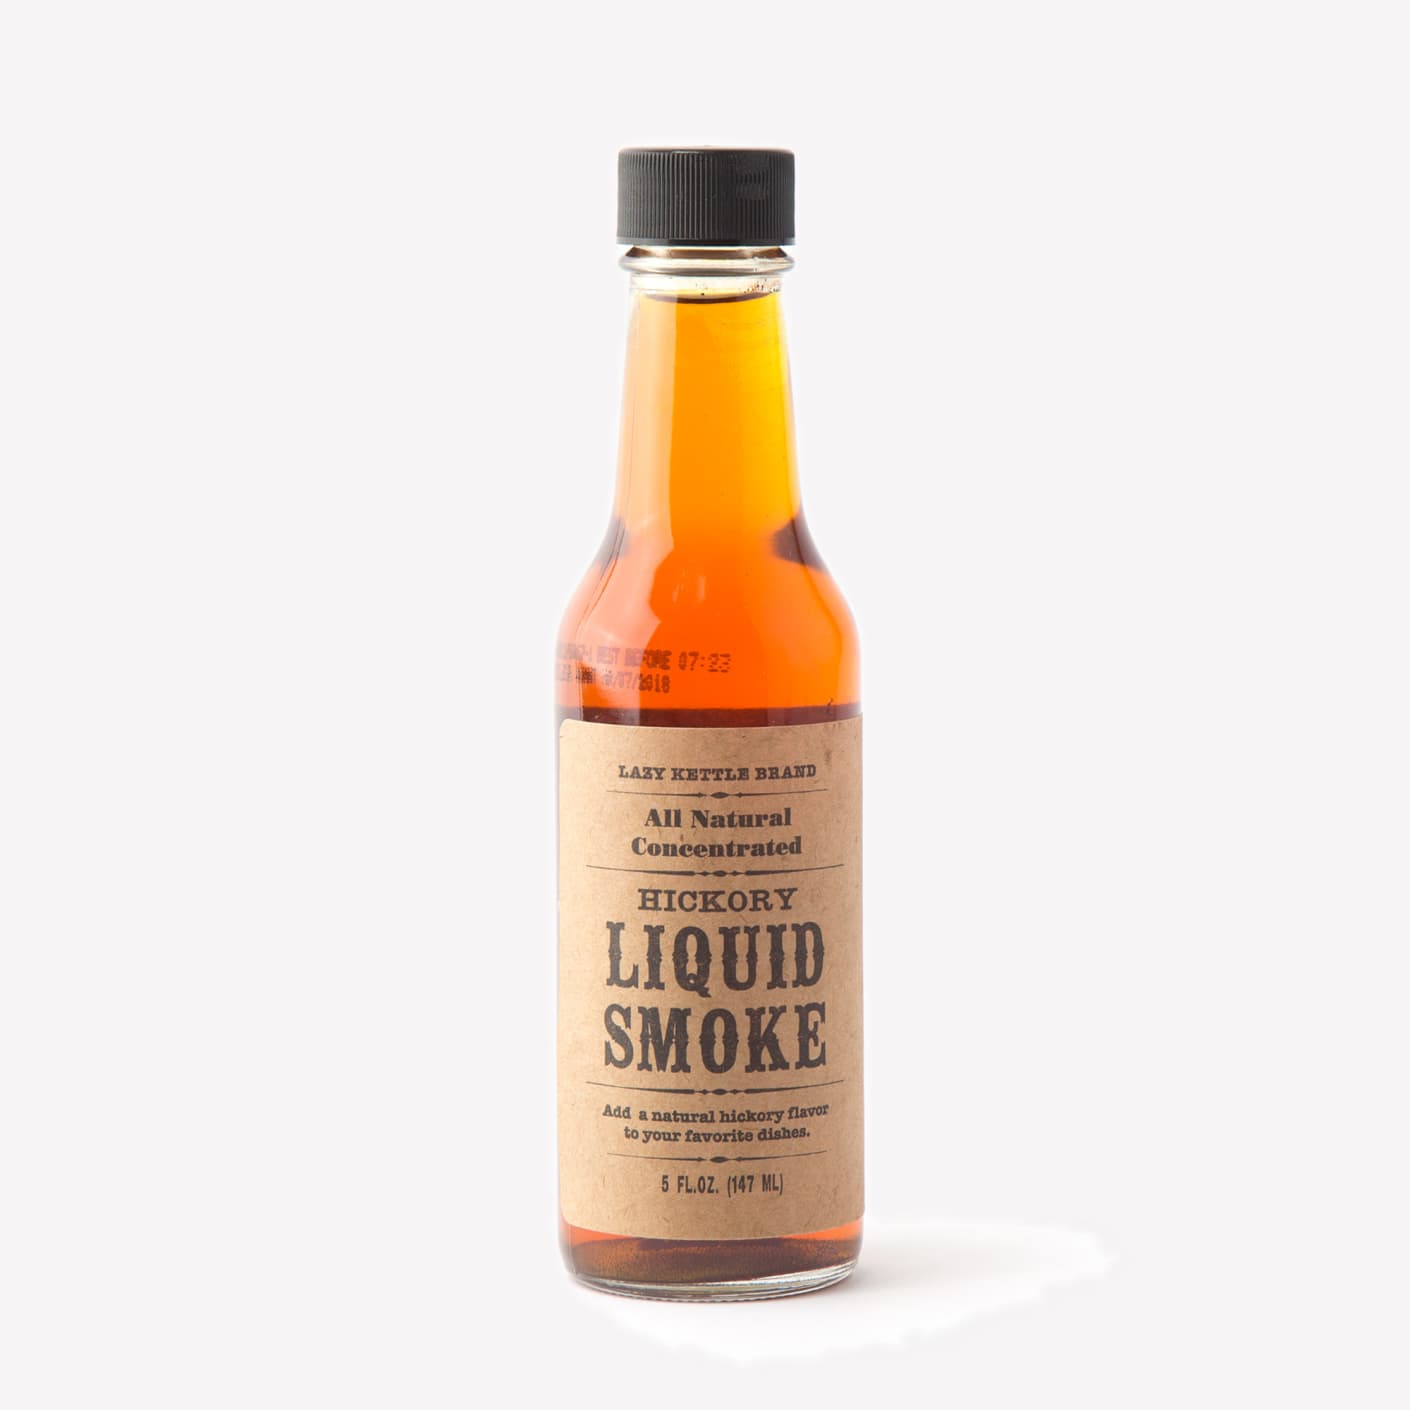 Lazy Kettle Brand All Natural Liquid Smoke